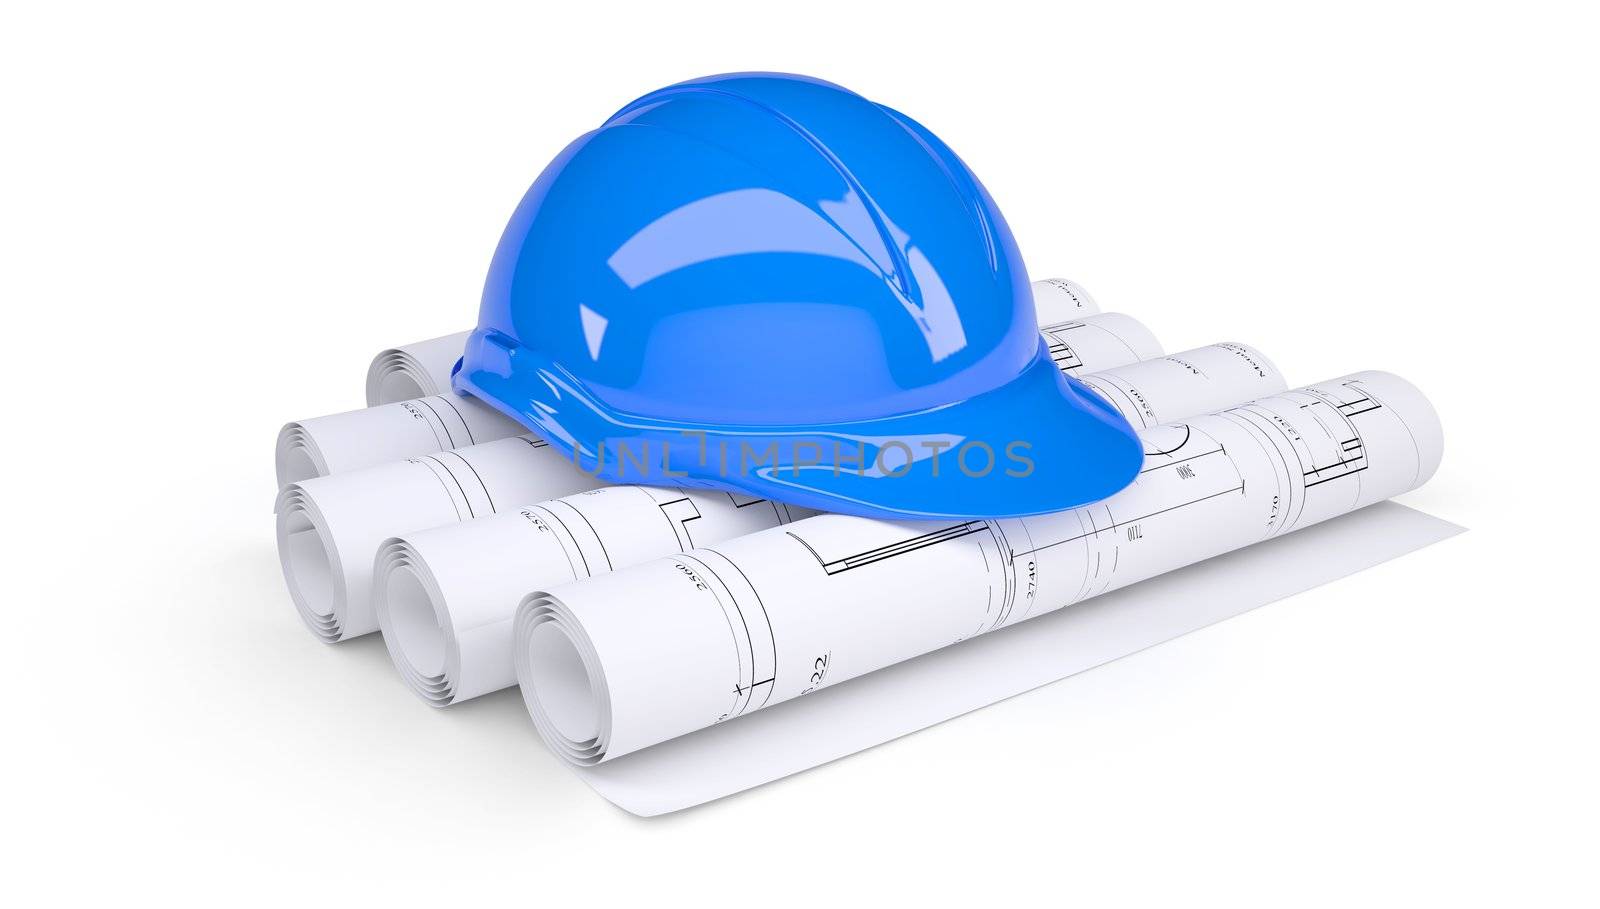 Blue construction helmet on the rolls of architectural drawings. Isolated on white background